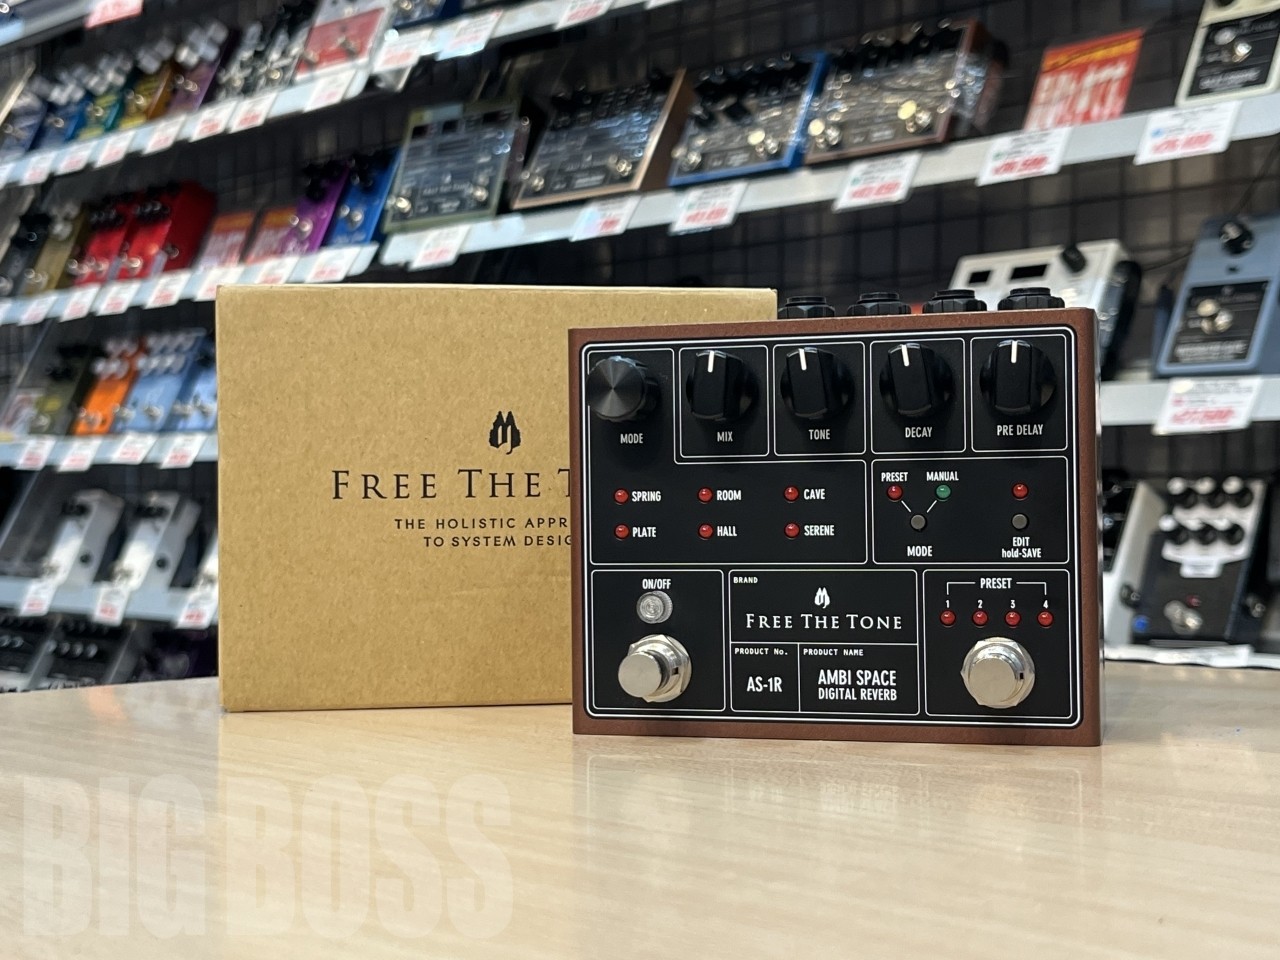 Free The Tone<br>AMBI SPACE AS-1R